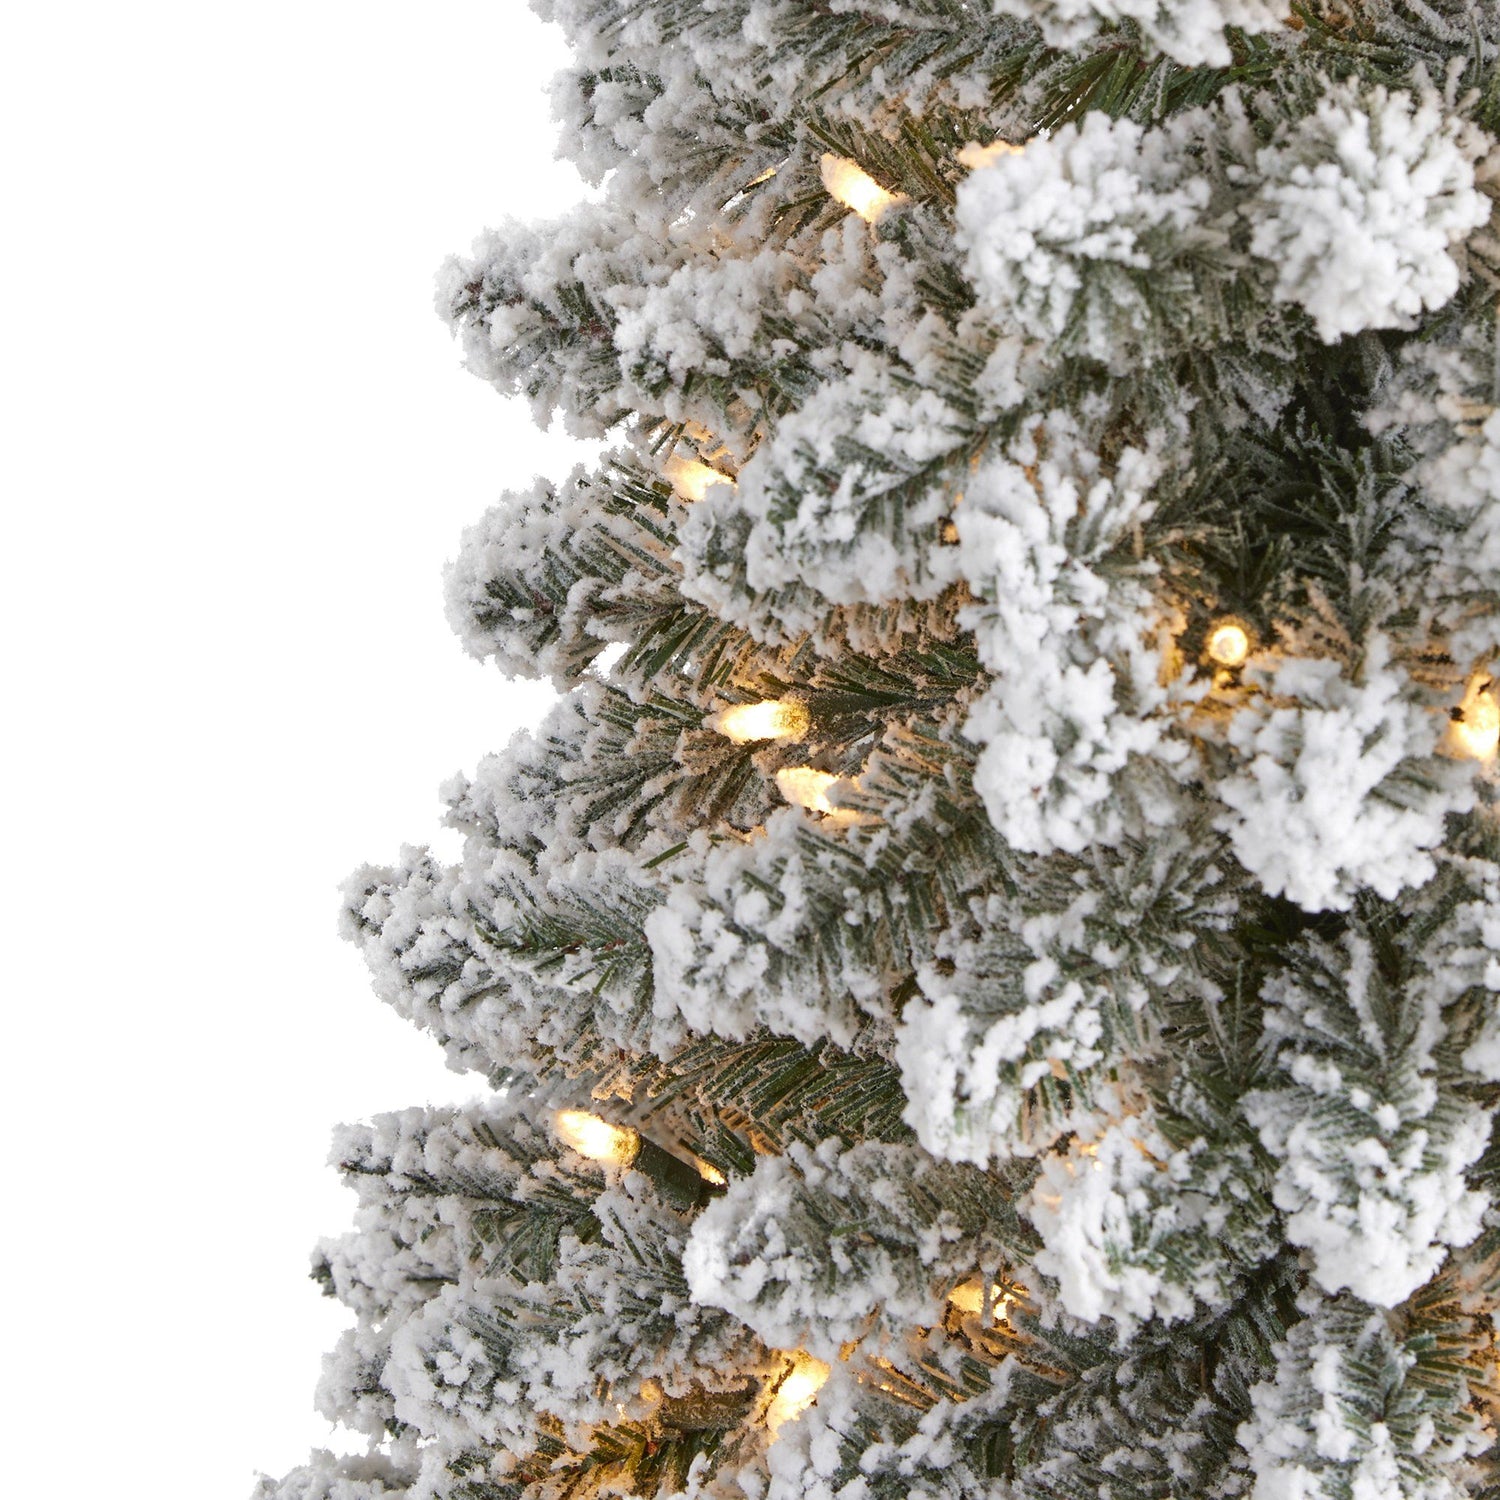 6’ Flocked Pencil Artificial Christmas Tree with 300 Clear Lights and 438 Bendable Branches